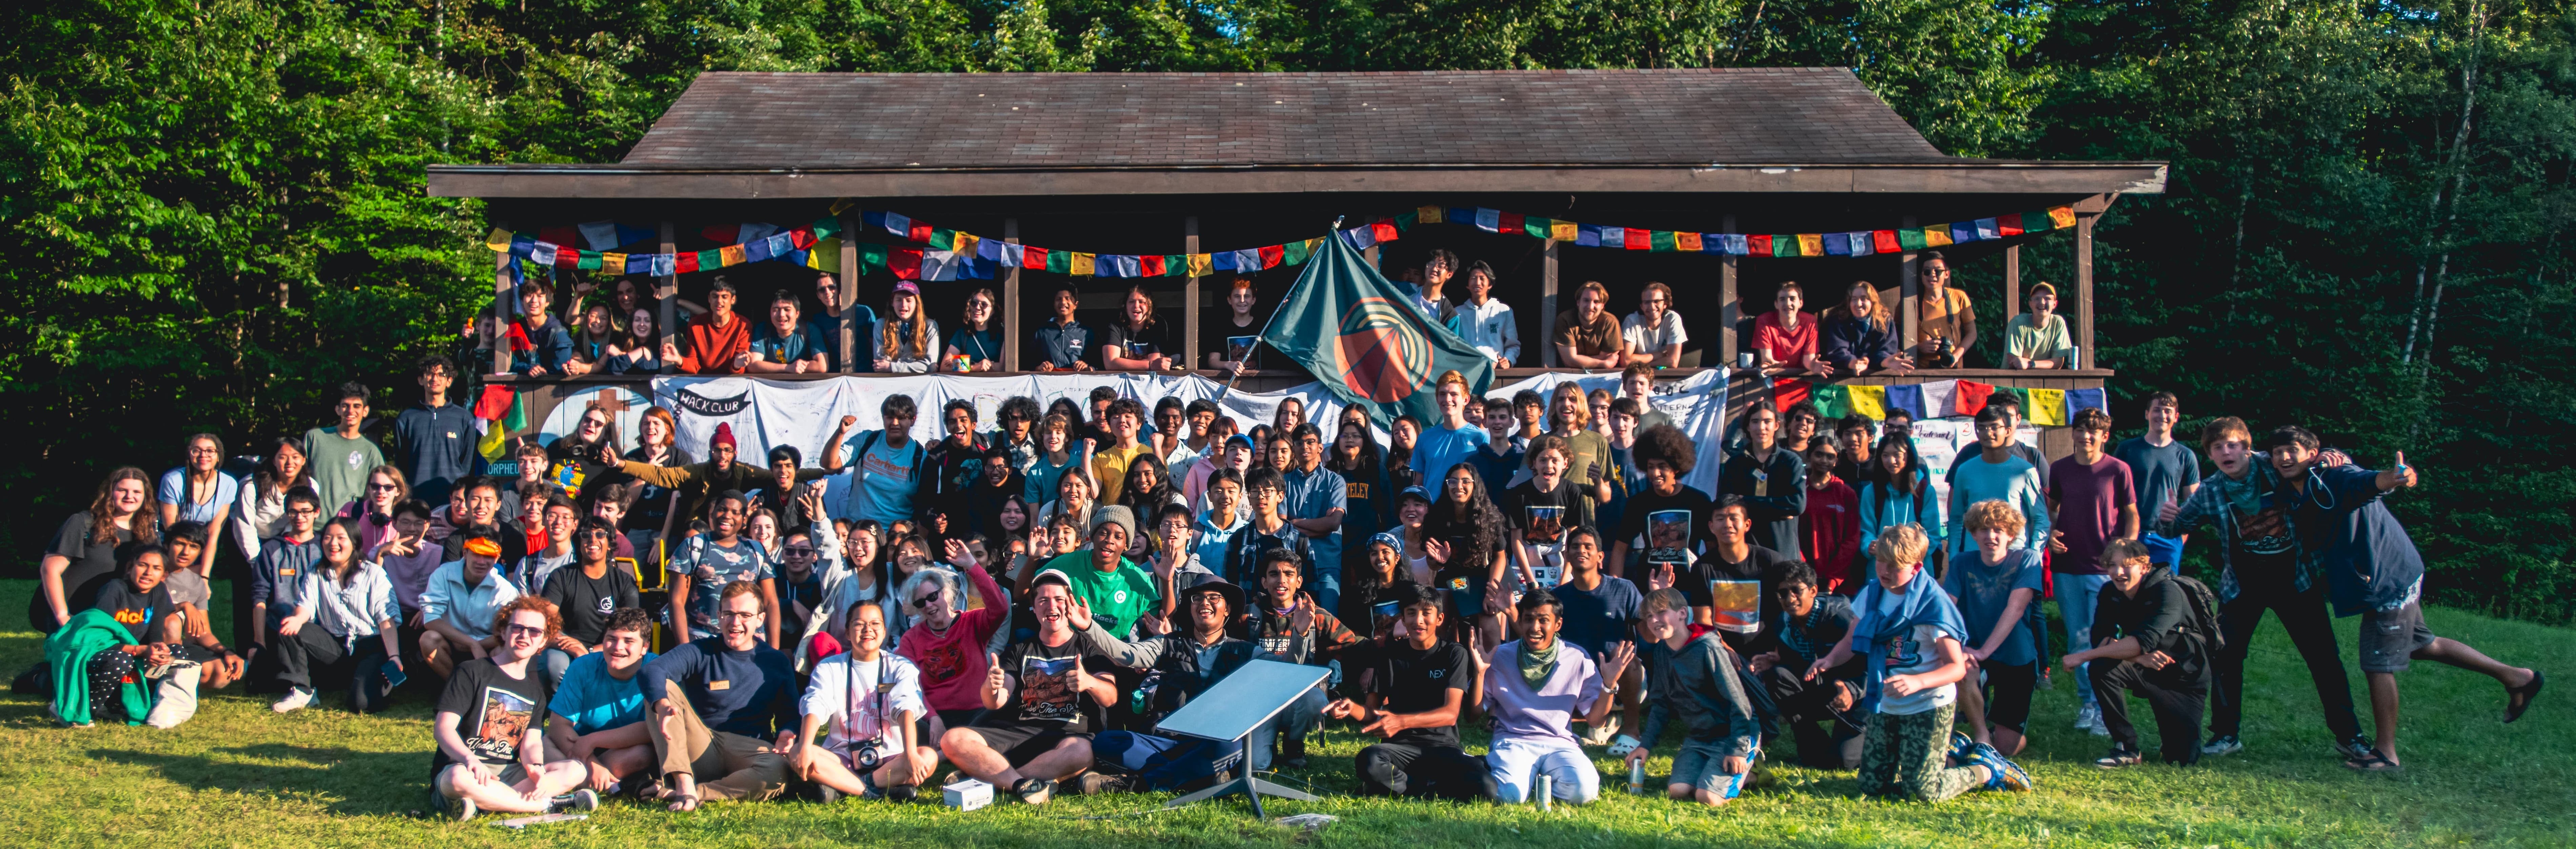 A group photo of Hack Clubbers in front of a cabin